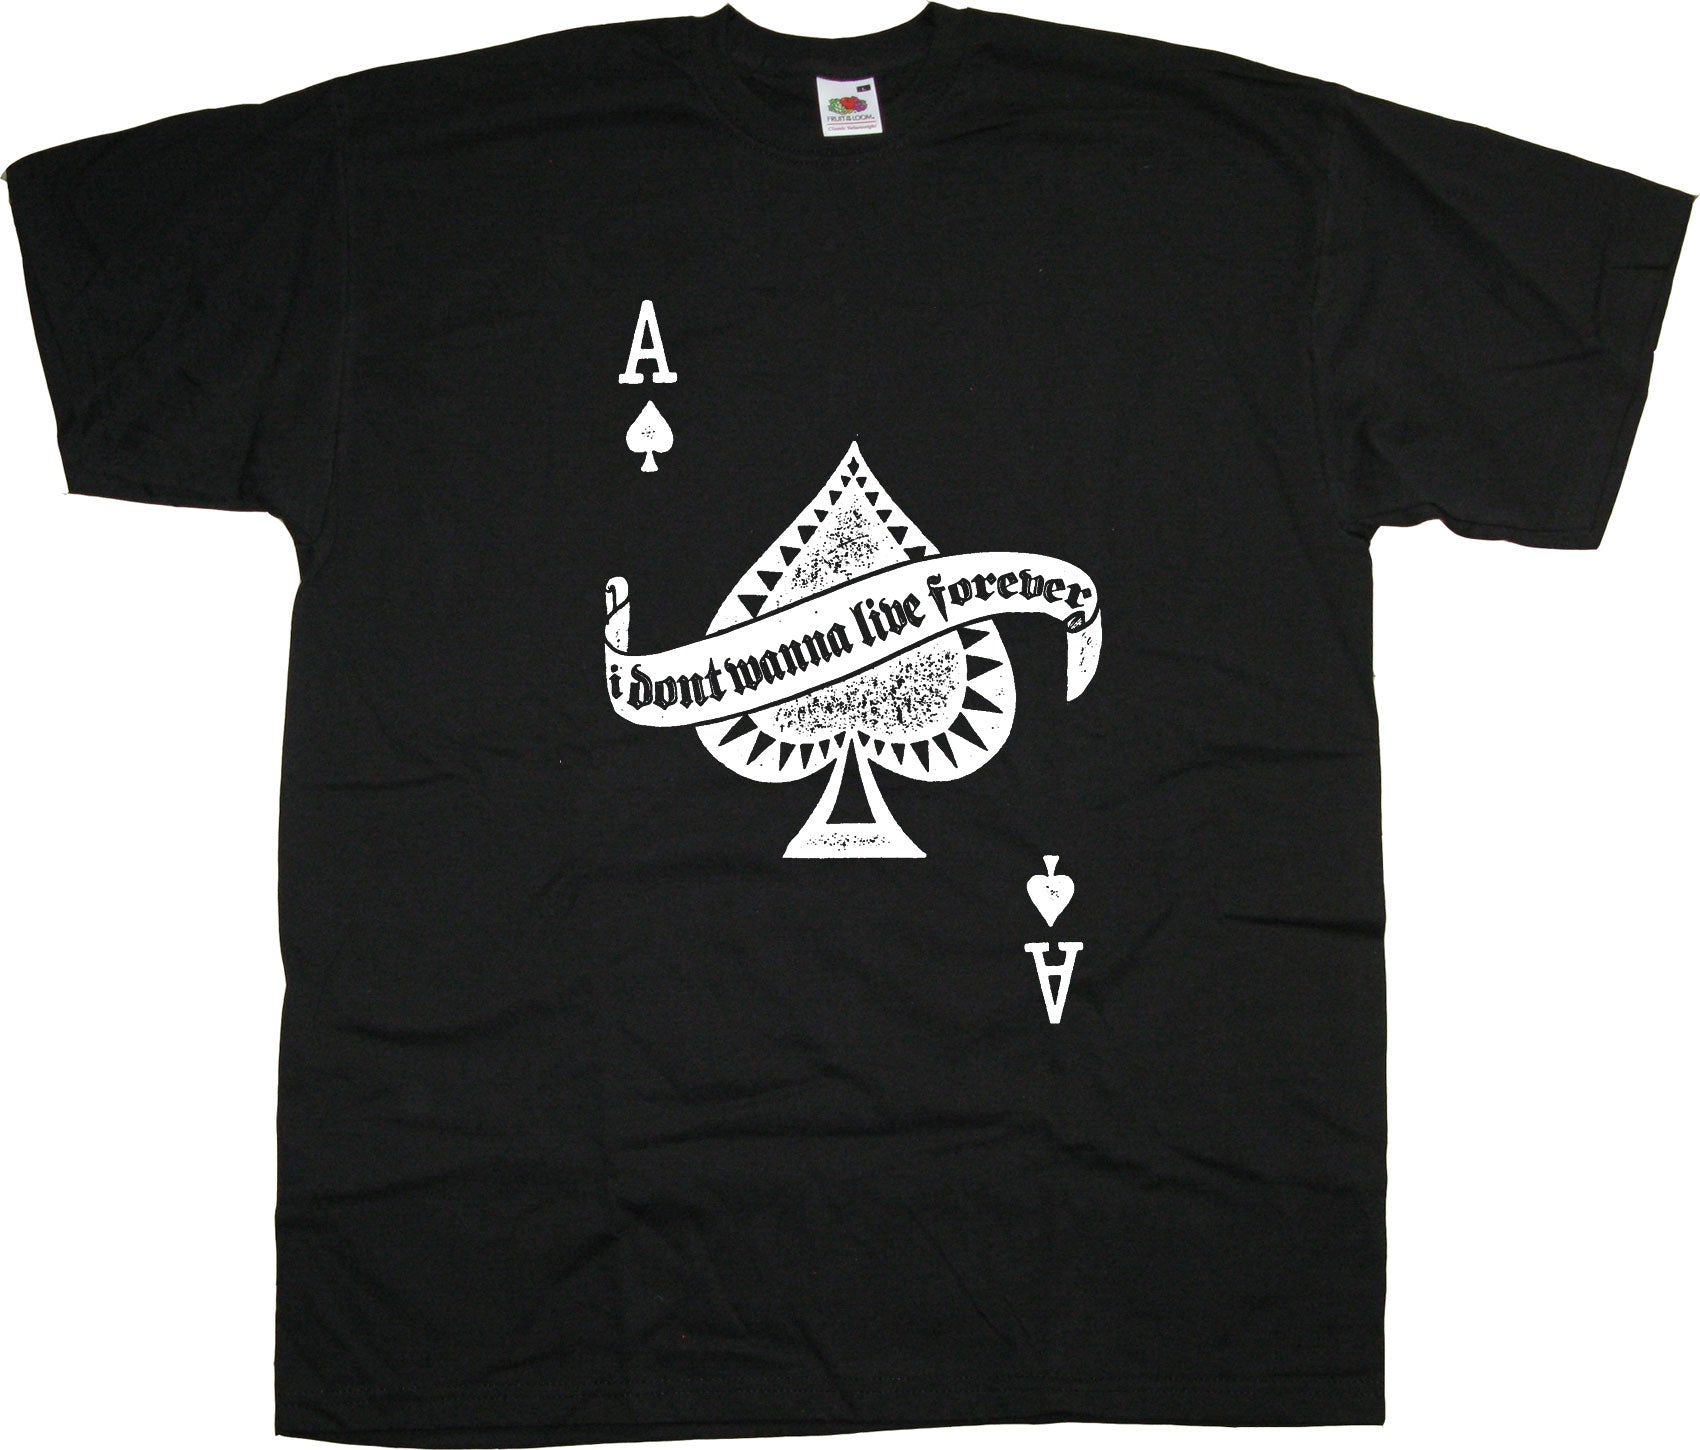 Ace Of Spades T shirt inspired by the Motorhead song | Classic Rock T ...